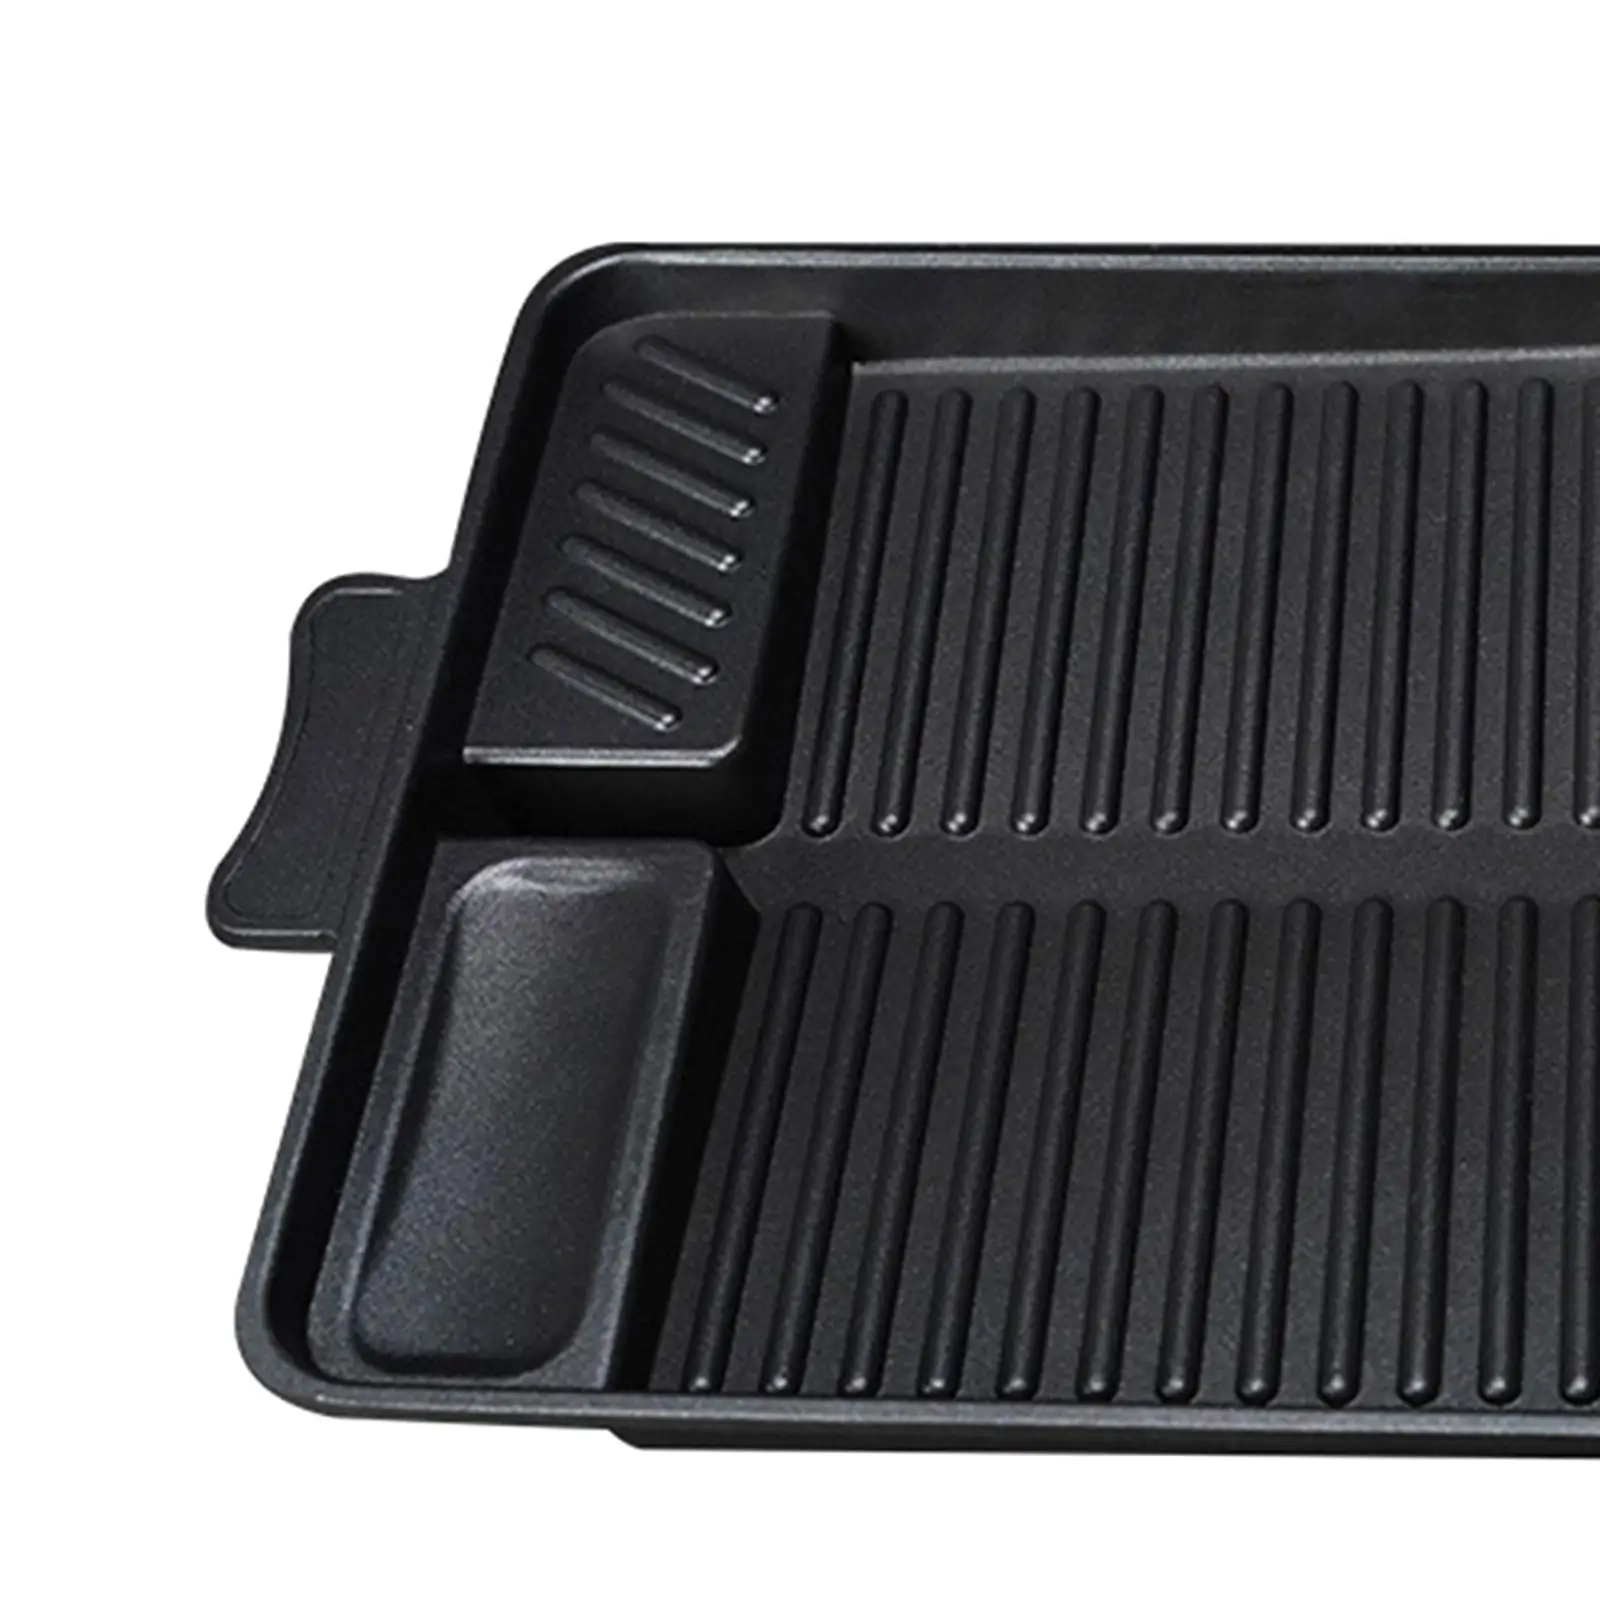 Aluminum Alloy Grill Pan Griddle Plate Meat Steak Grill tray Nonstick Home Kitchen with Handle for Barbecue Outdoor